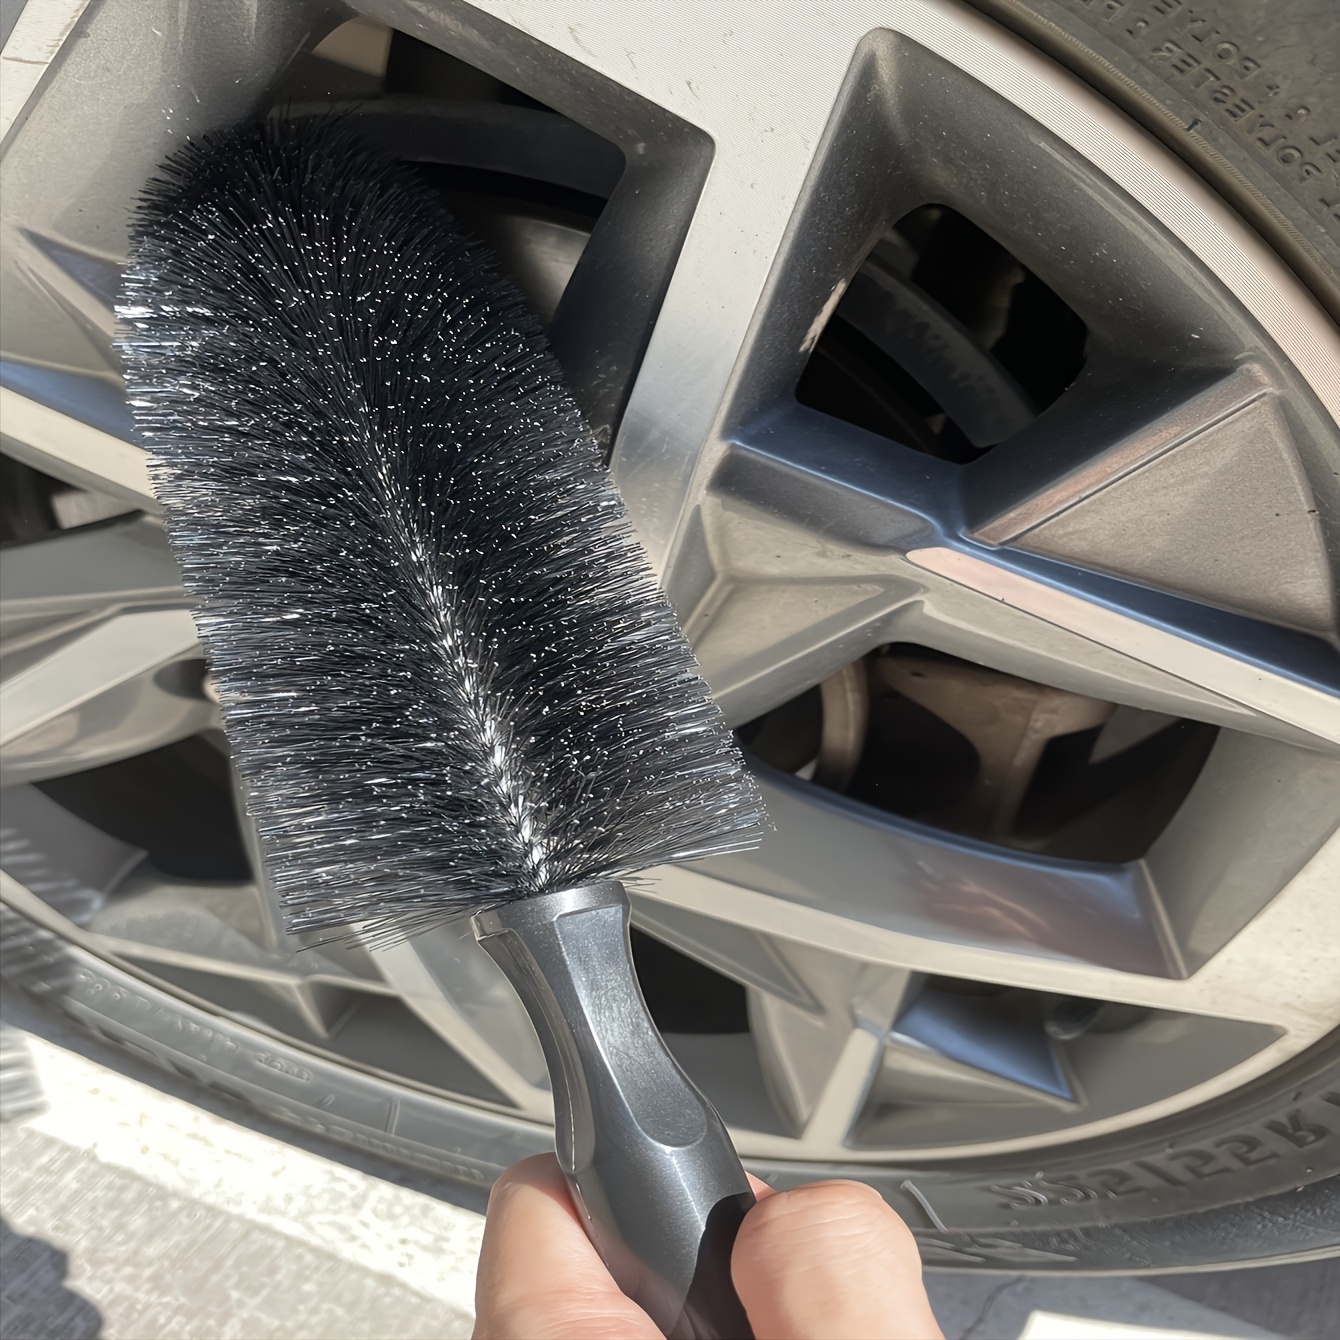 

1pc Car Tire Brush, Wheel Brush Car Wash Tool, Clean And Wash Wheel Steel Rims, Special Powerful Degreasing